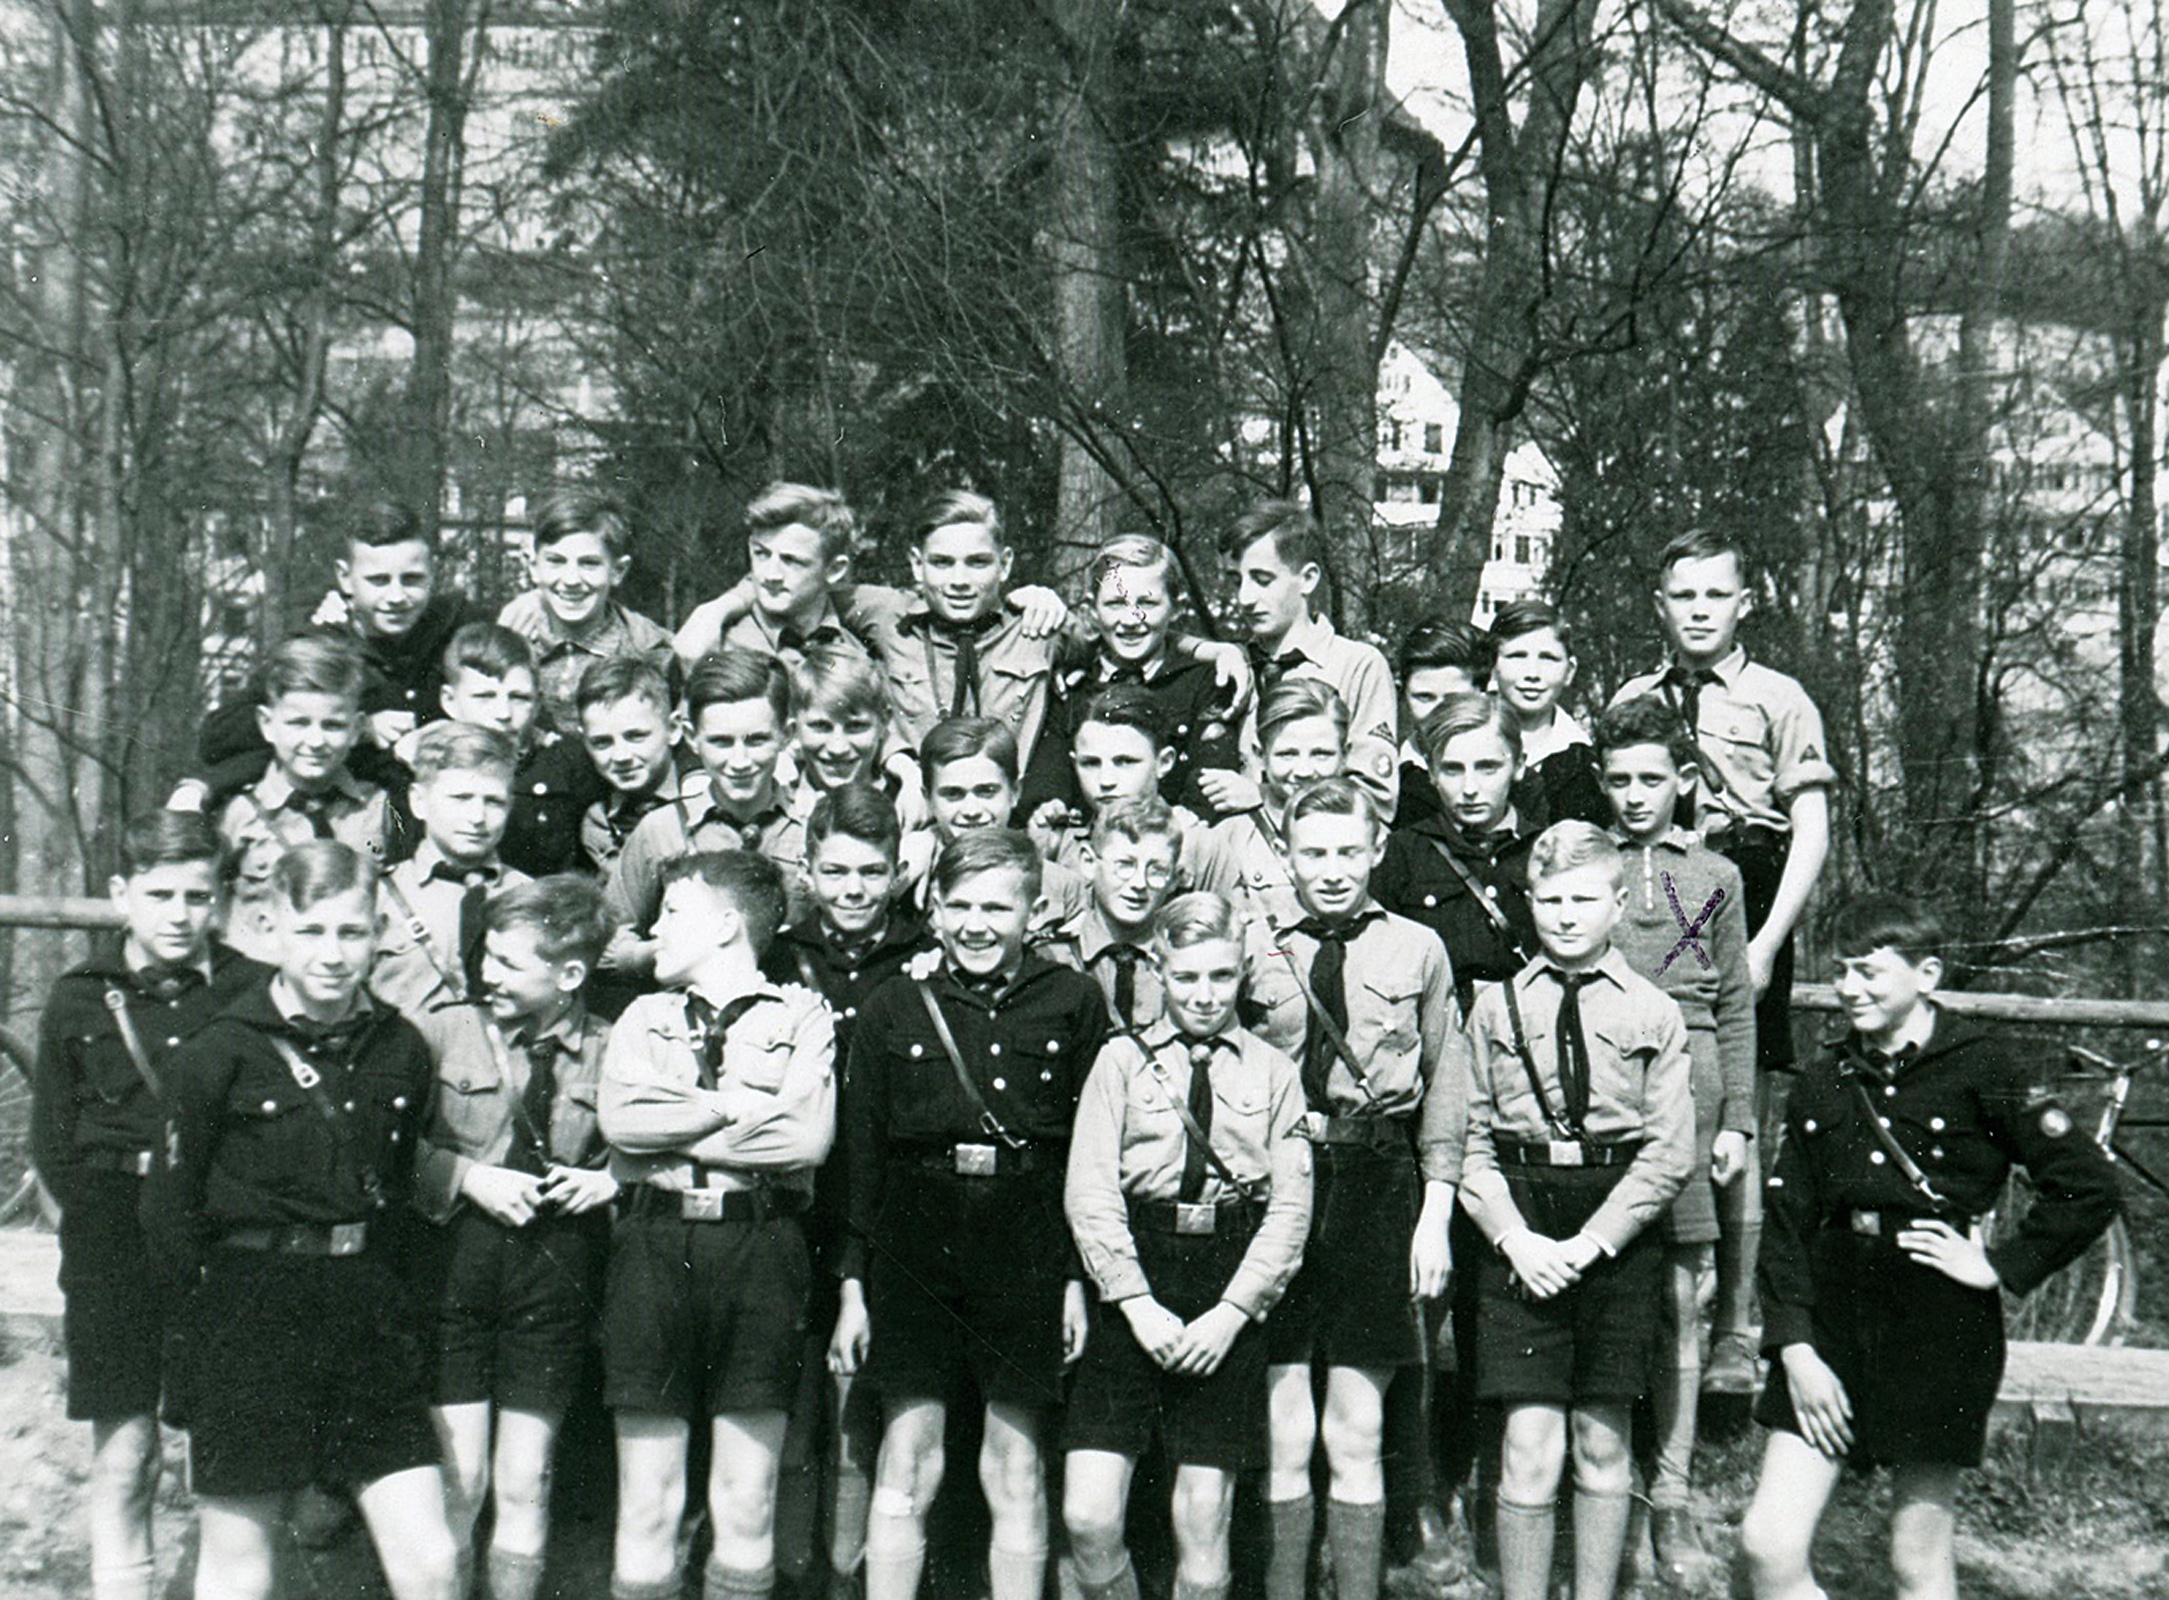 Still tolerated in 1937, but without Hitler Youth uniform already visibly excluded from the class community: Hans Bernheim in the second row, first from the right.